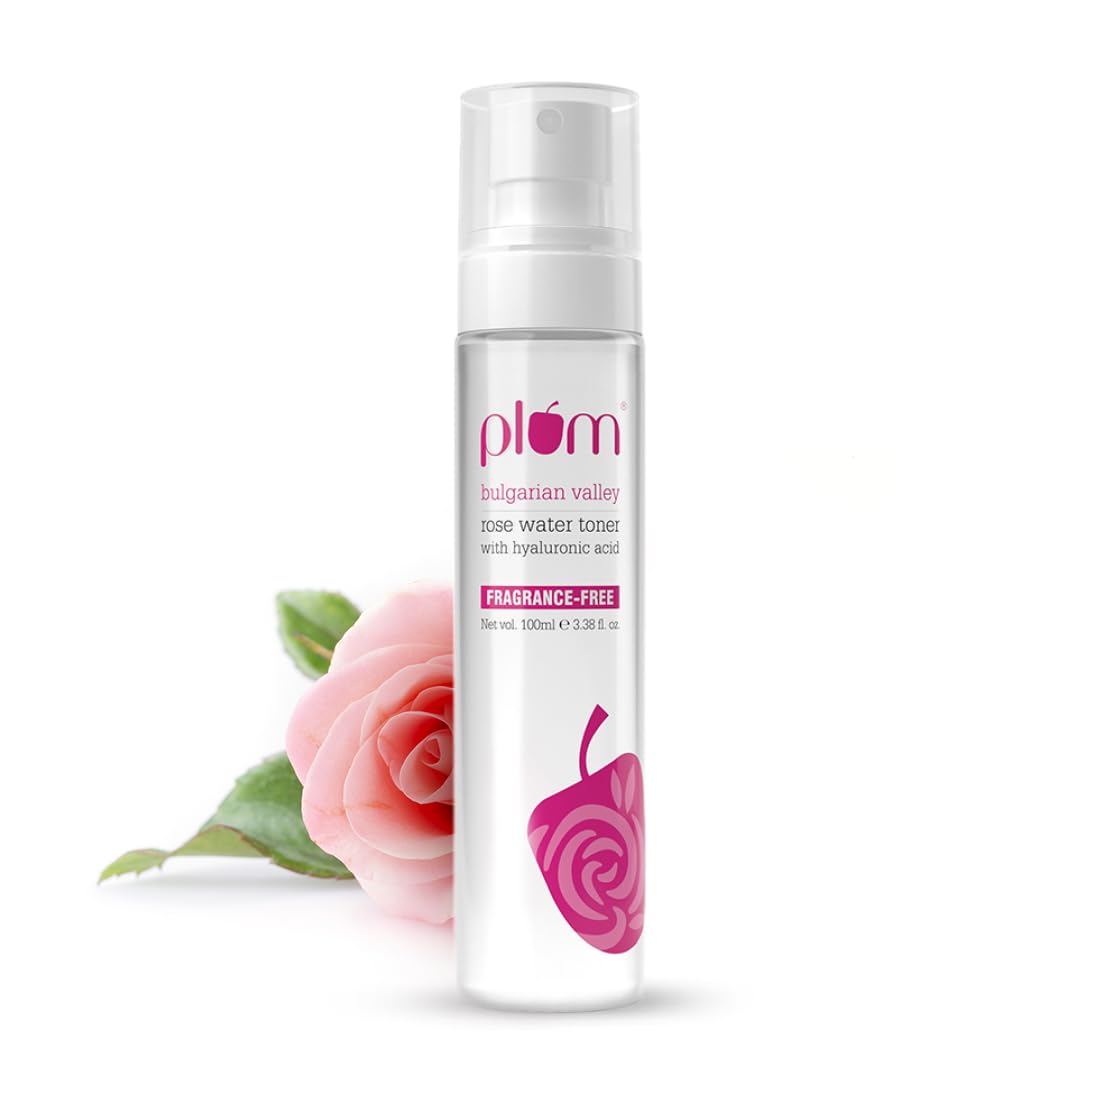 Plum Bulgarian Valley Rose water Toner For Face | With Hyaluronic Acid & Bulgarian Rose Extracts | Tightens Pores | Instantly Hydrates | Balances pH Levels | Alcohol-Free | Non-Drying | Soft Spray Format | All Skin types | 100 ml  from Plum